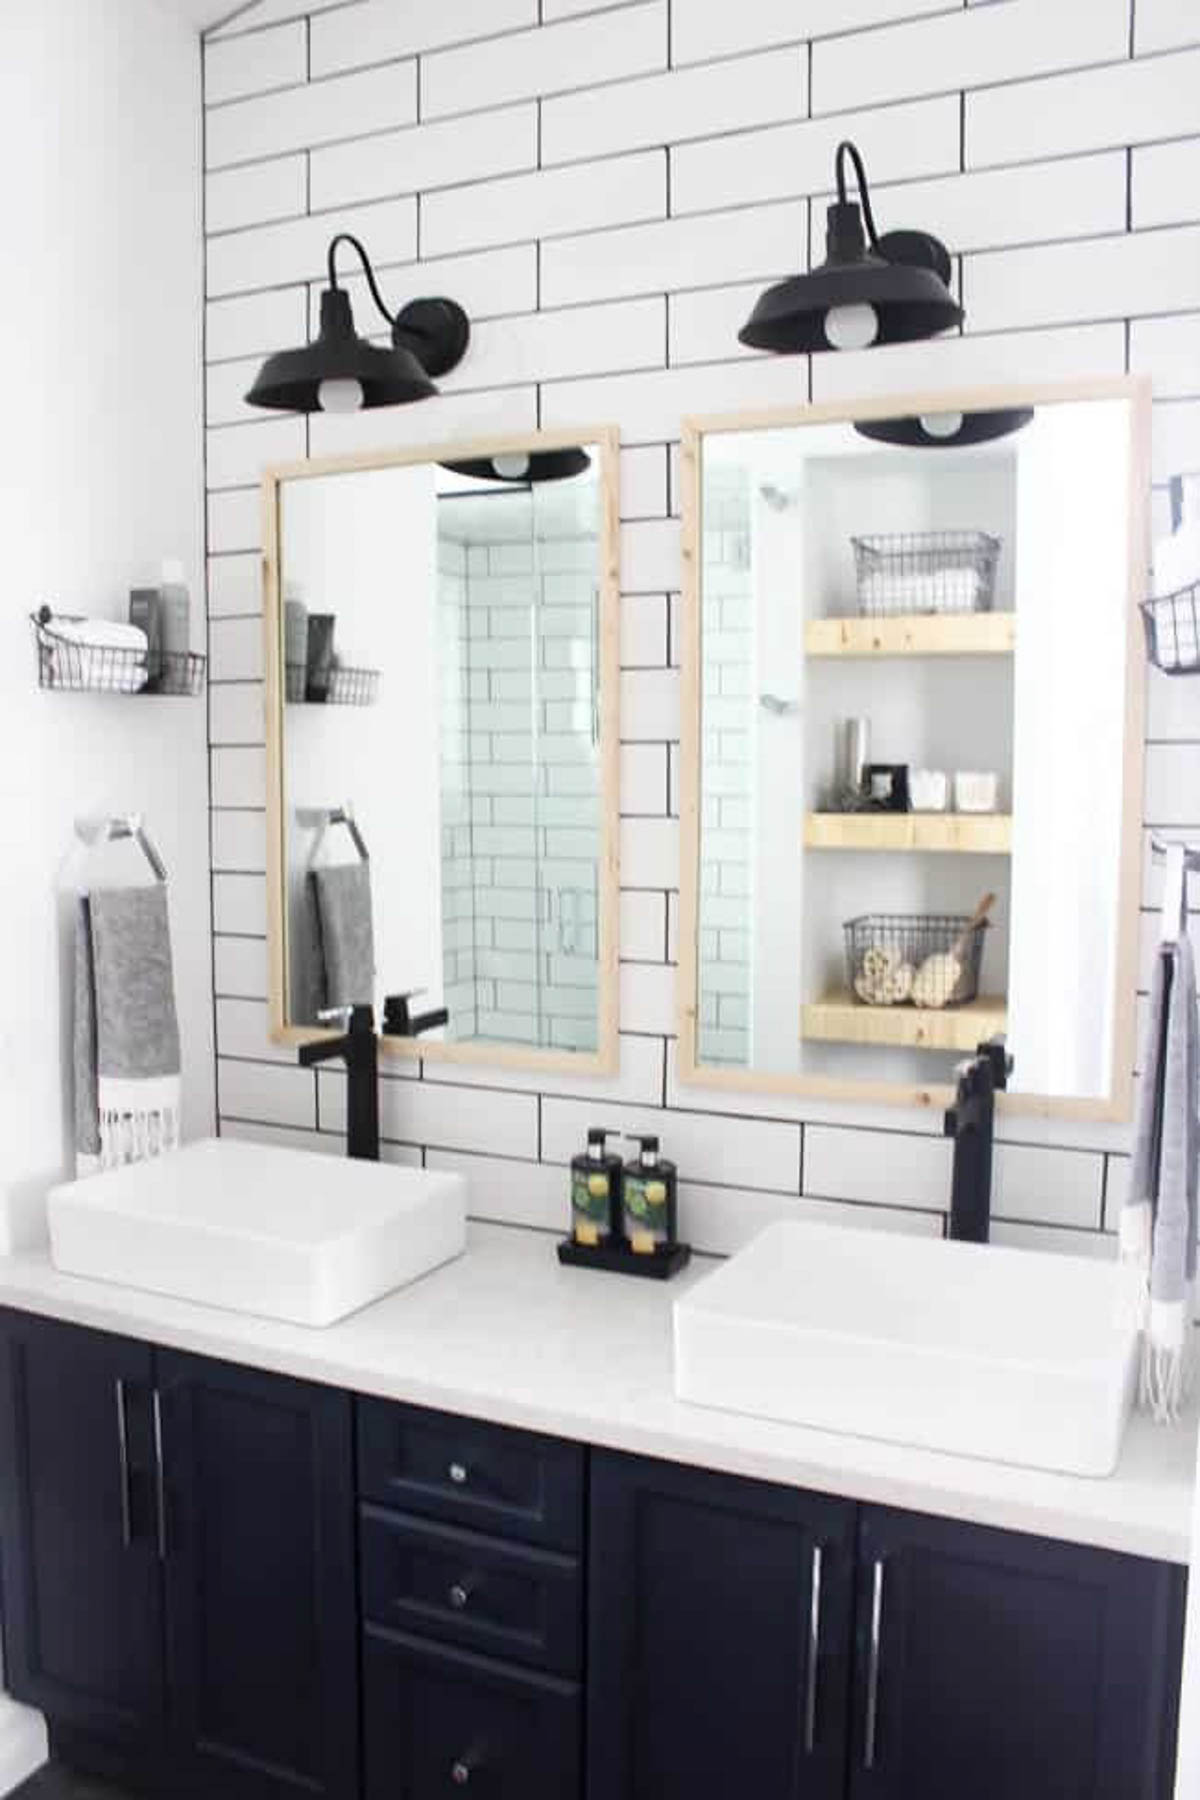 Renovated bathroom with wood-framed mirrors and subway tiles